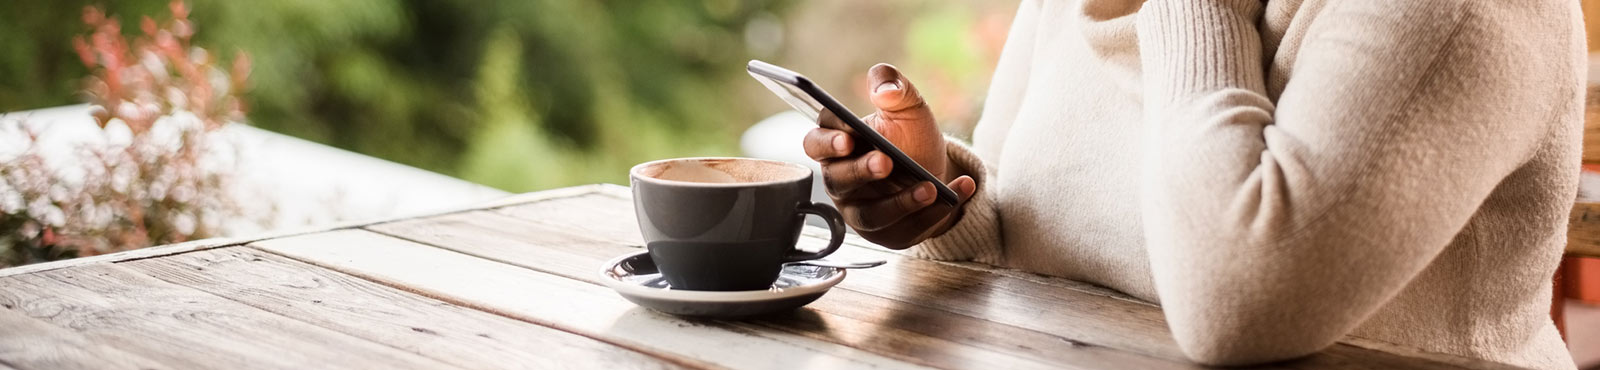 Woman drinking coffee and using her cellphone